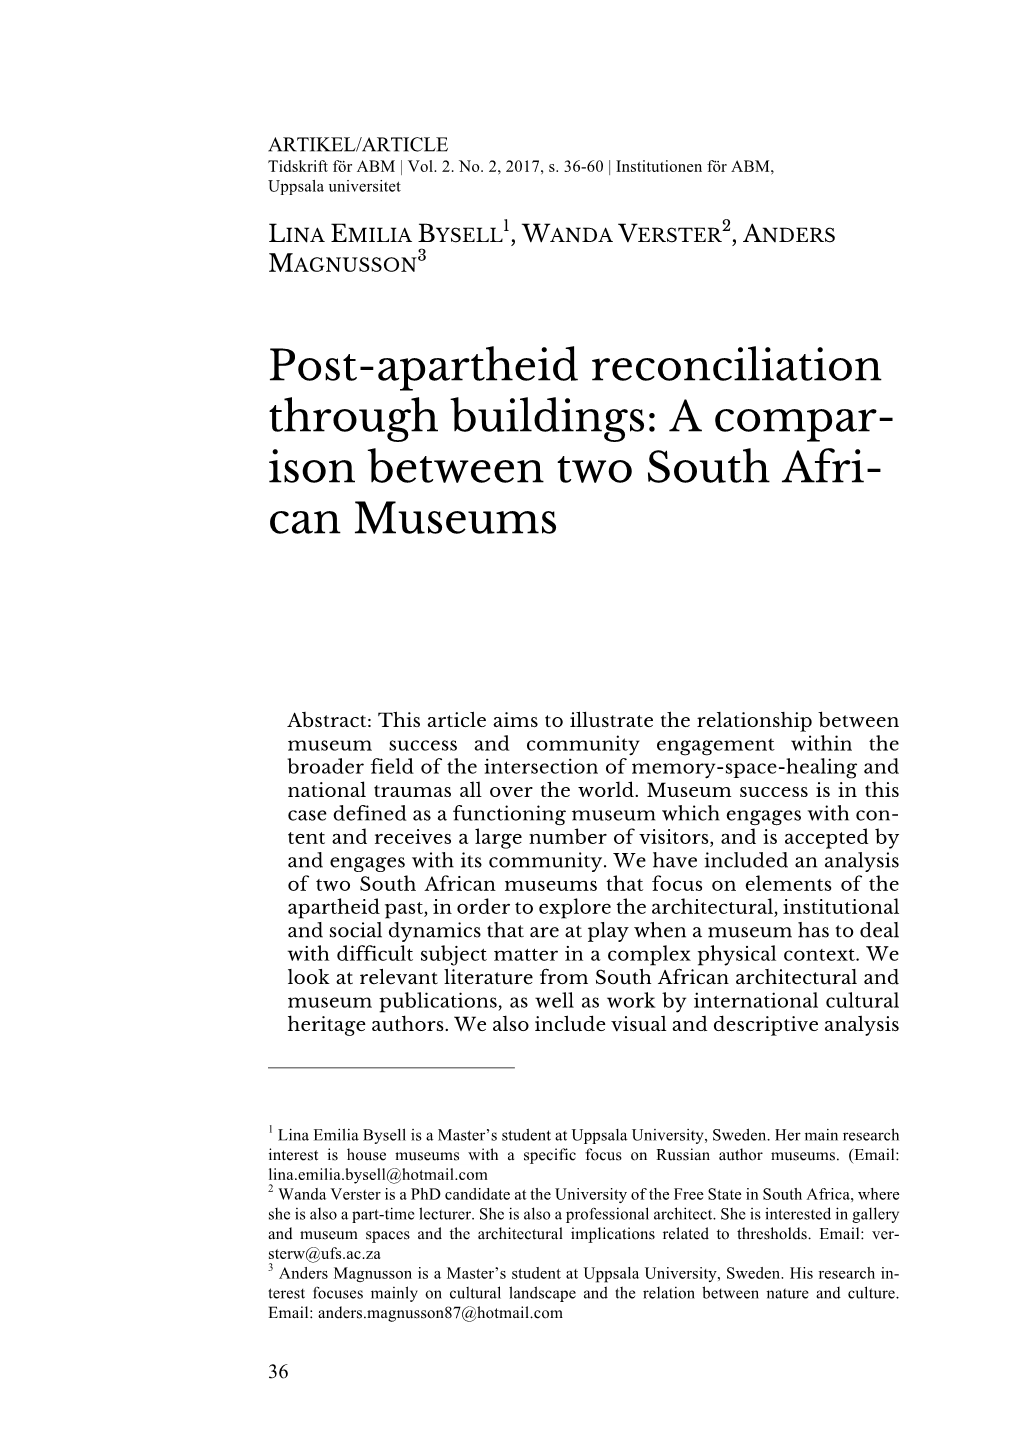 Post-Apartheid Reconciliation Through Buildings: a Compar- Ison Between Two South Afri- Can Museums